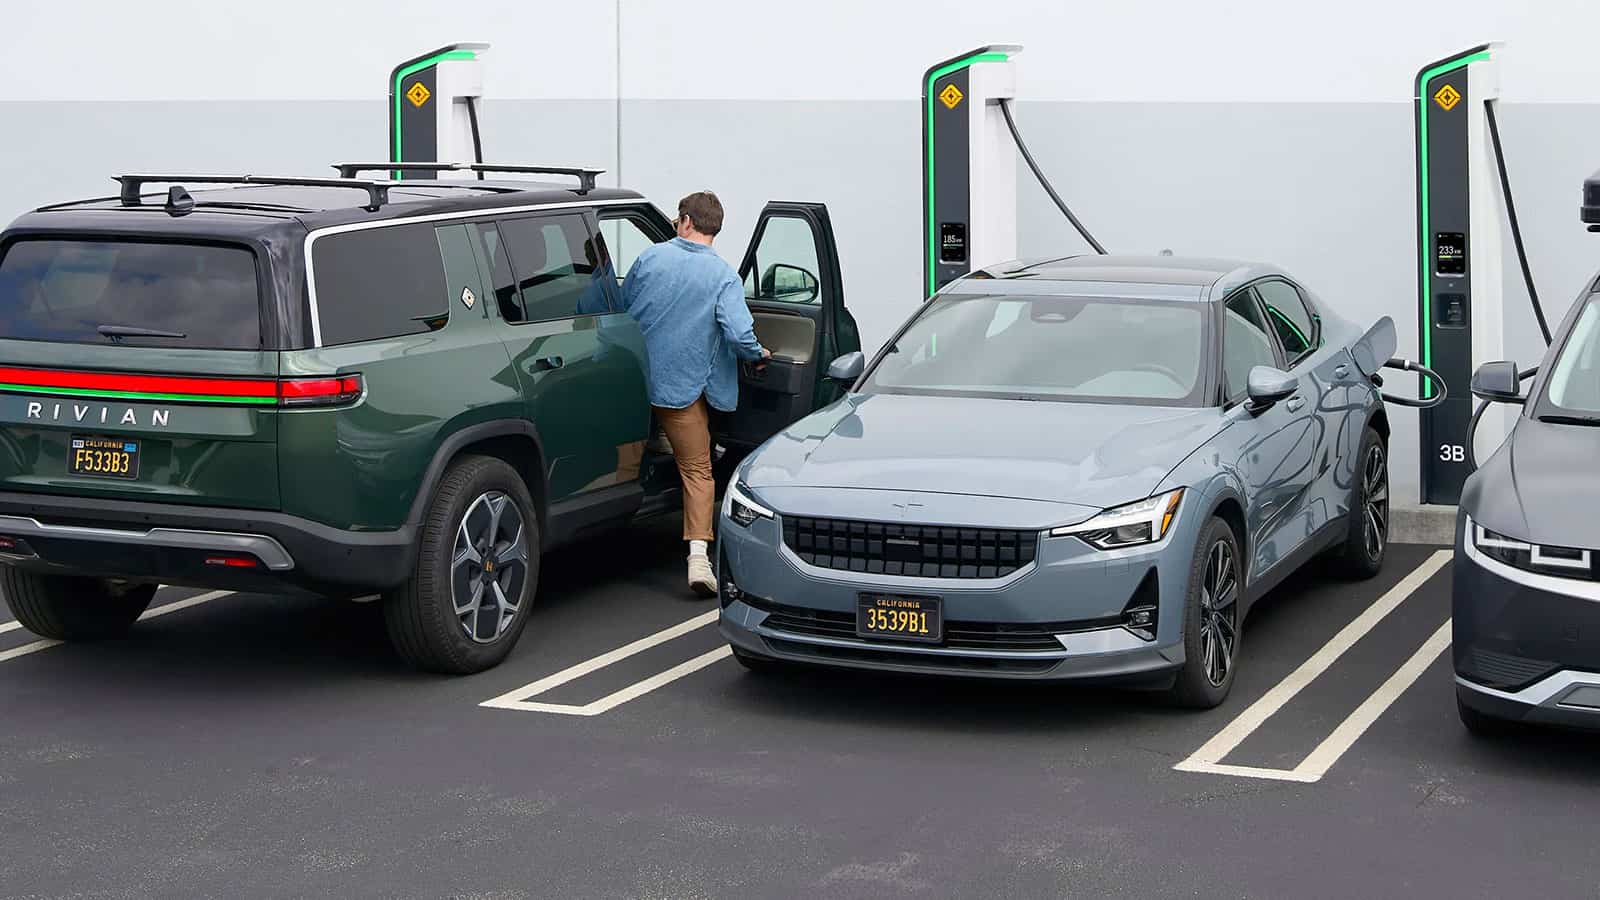 Rivian charging network station with EVs parked and charging